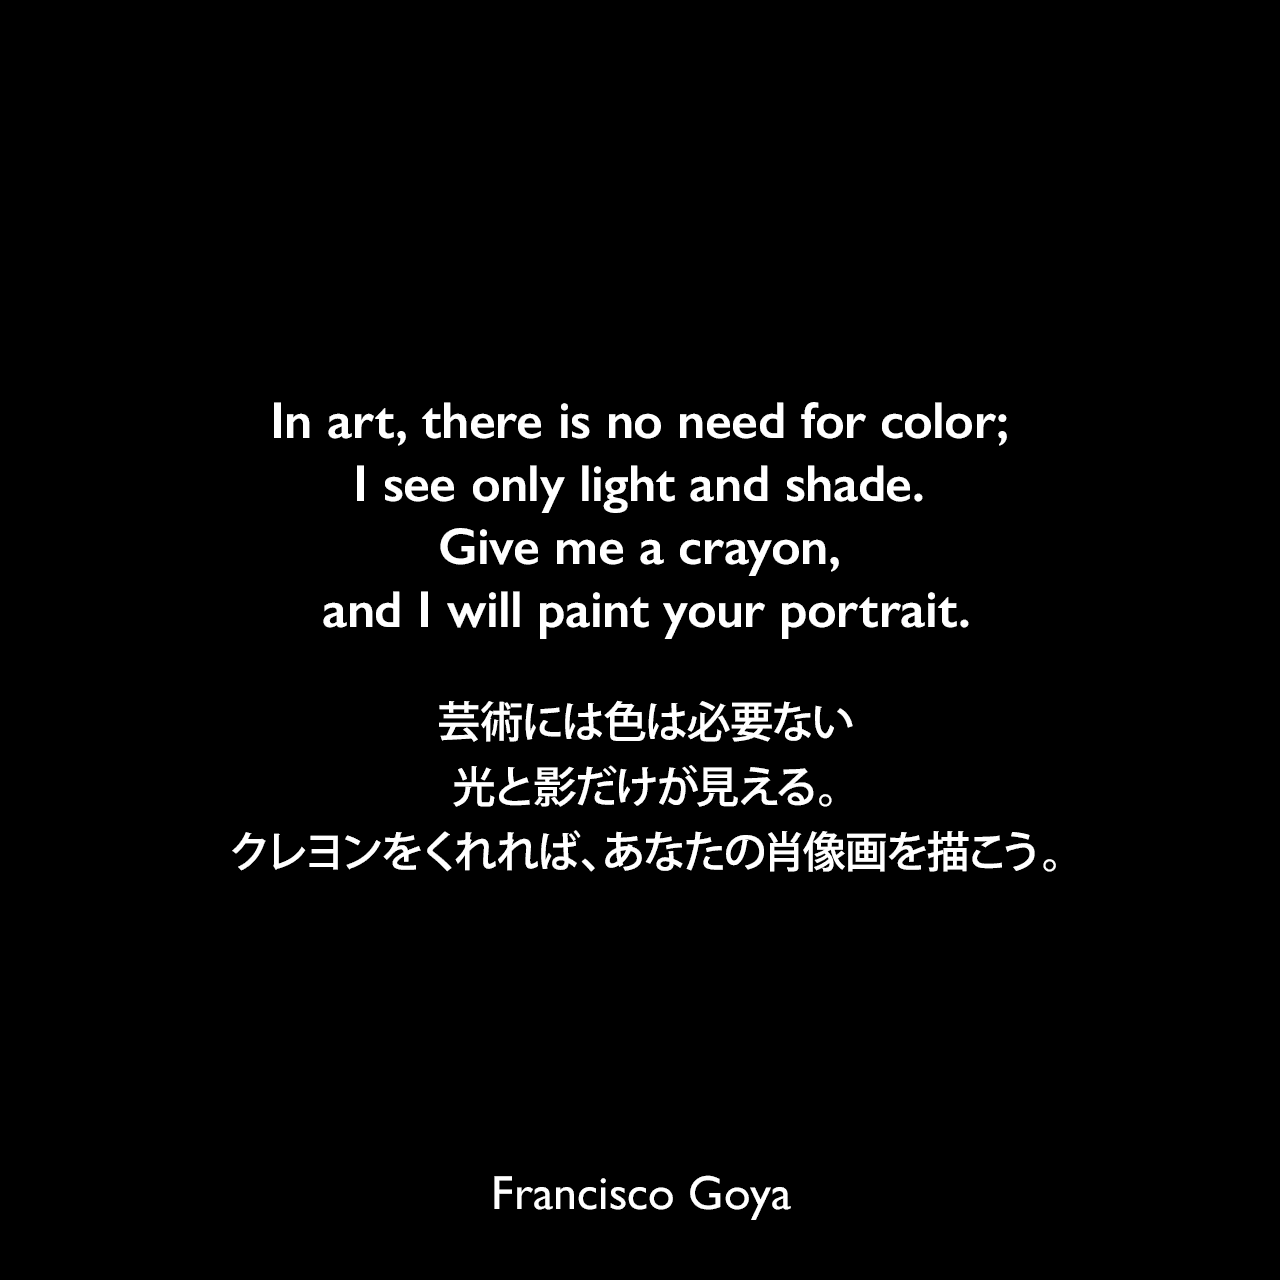 In art, there is no need for color; I see only light and shade. Give me a crayon, and I will paint your portrait.芸術には色は必要ない、光と影だけが見える。クレヨンをくれれば、あなたの肖像画を描こう。Francisco Goya